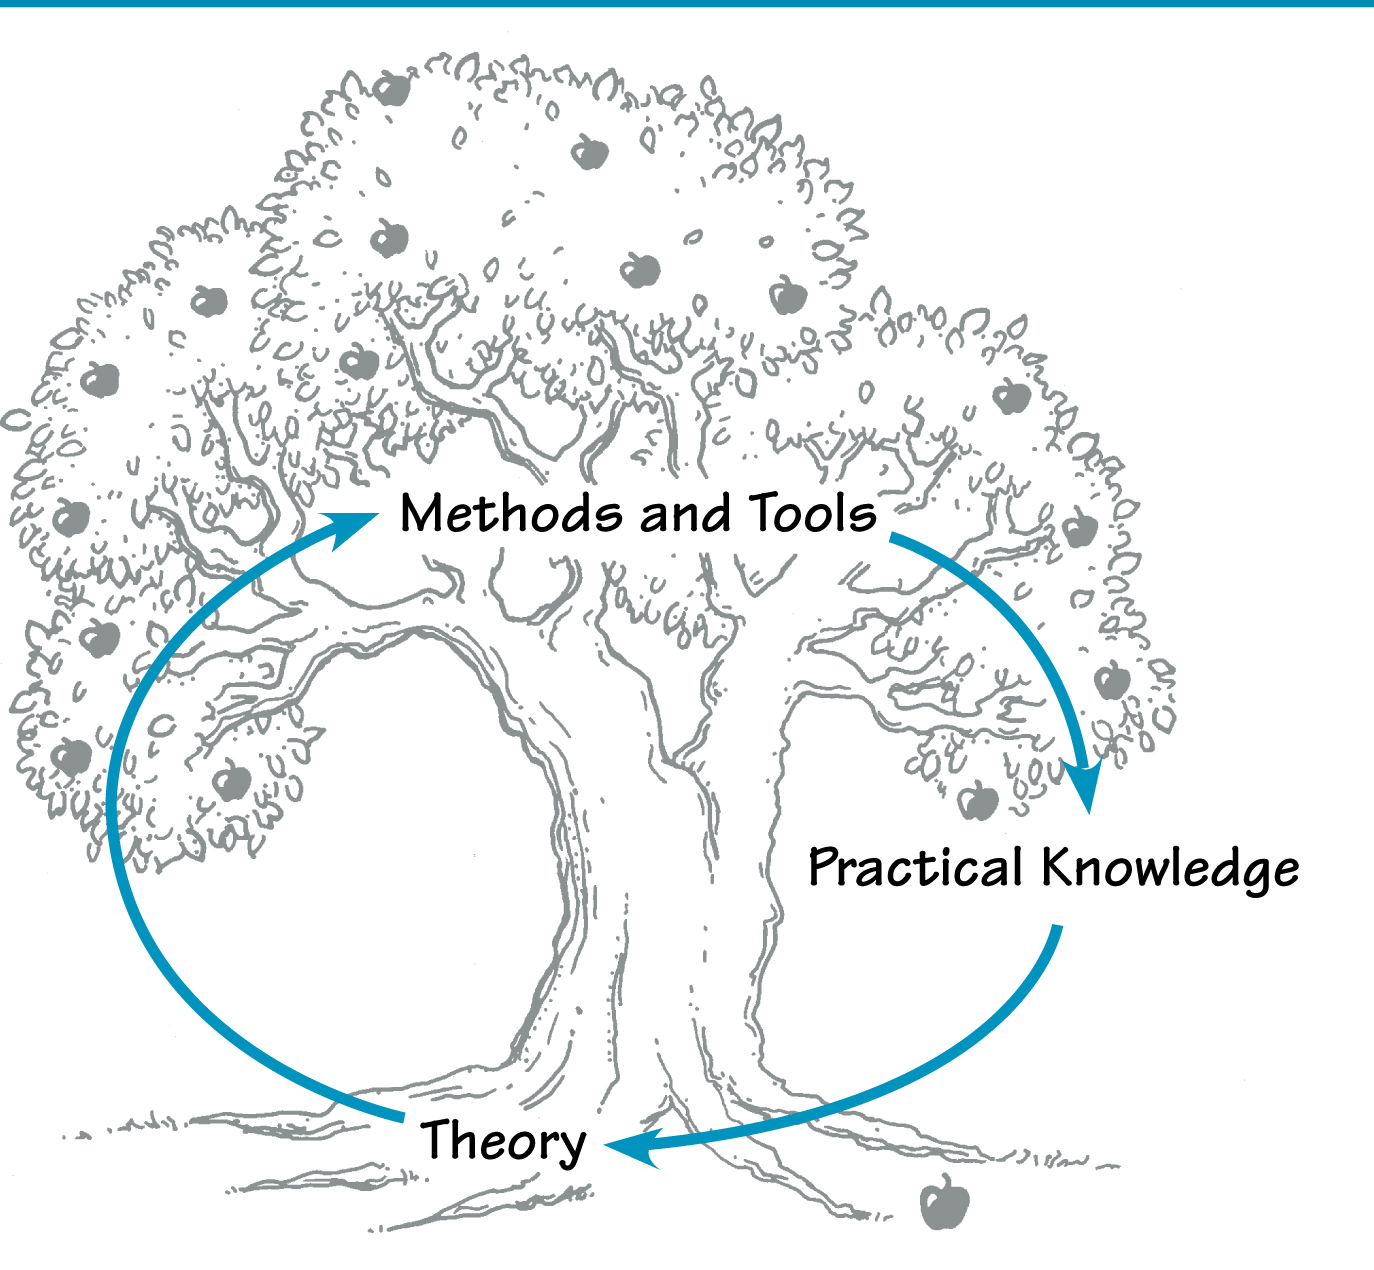 THE CYCLE OF KNOWLEDGE-CREATION.